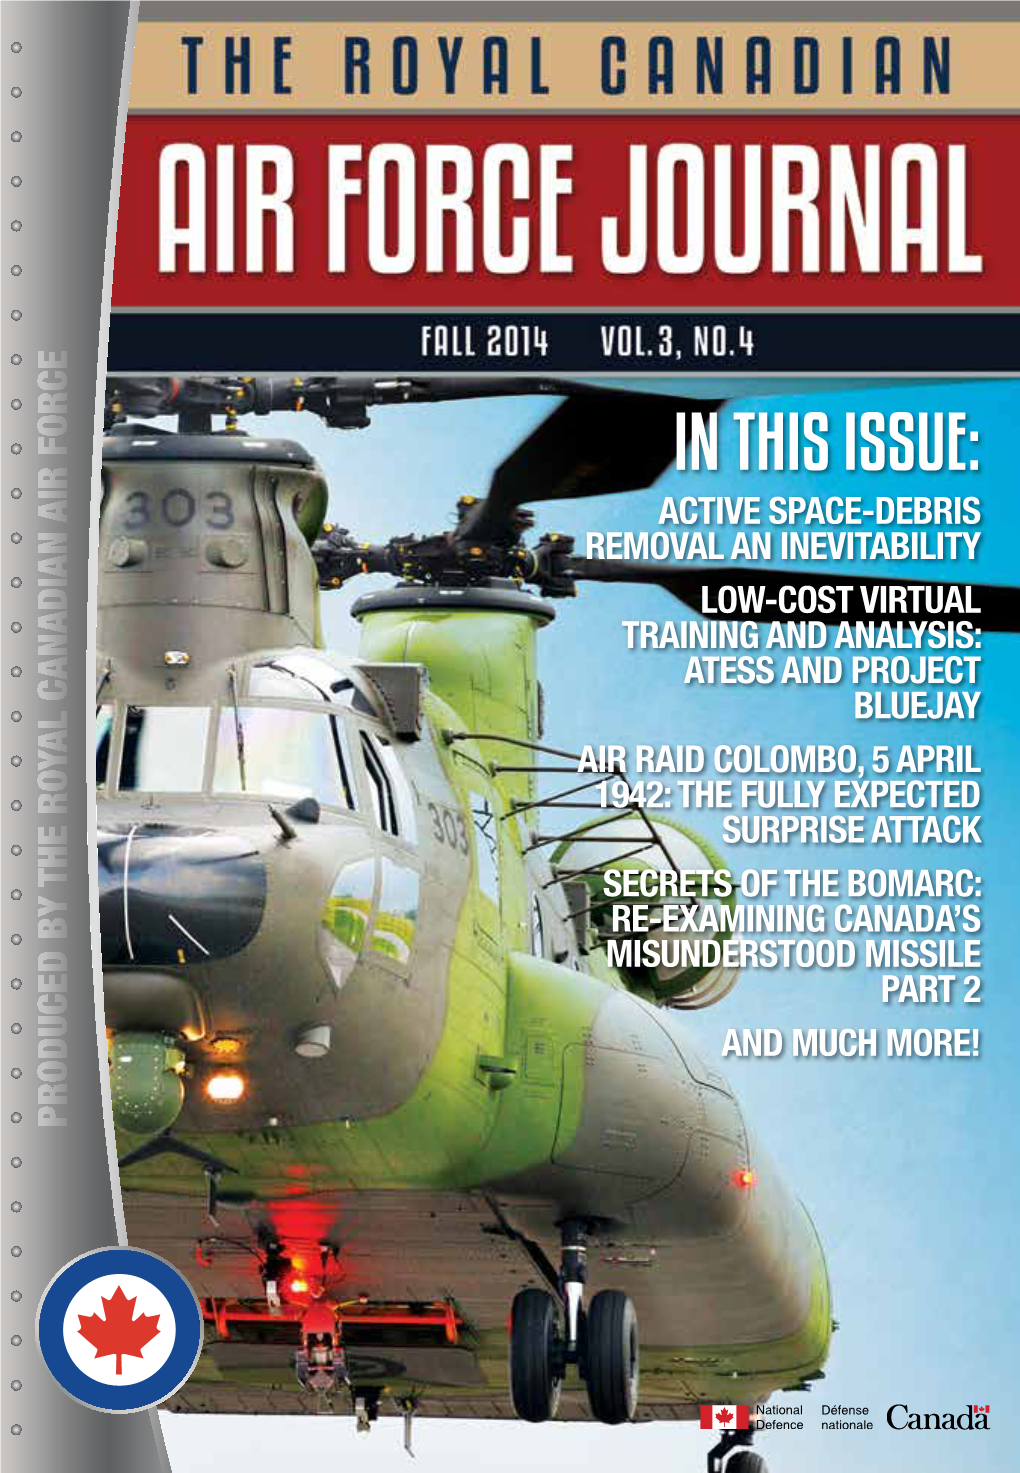 THE ROYAL CANADIAN AIR FORCE JOURNAL Is an Official Publication of the Hommes